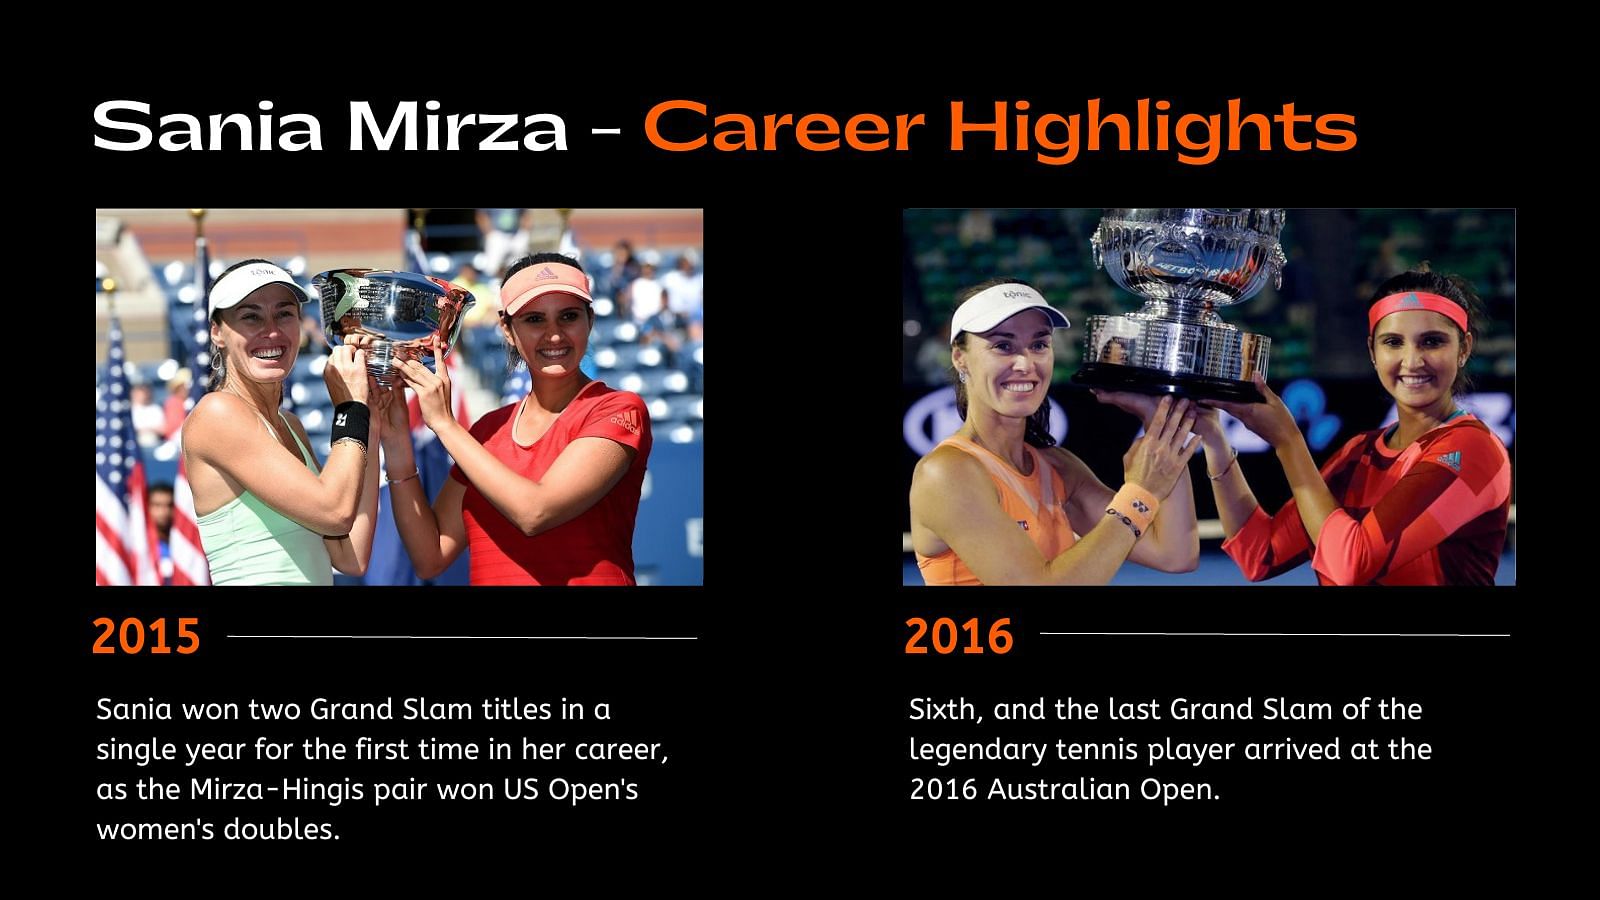 Top Spot On the line: Will the Santina reunion be helpful for Mirza?